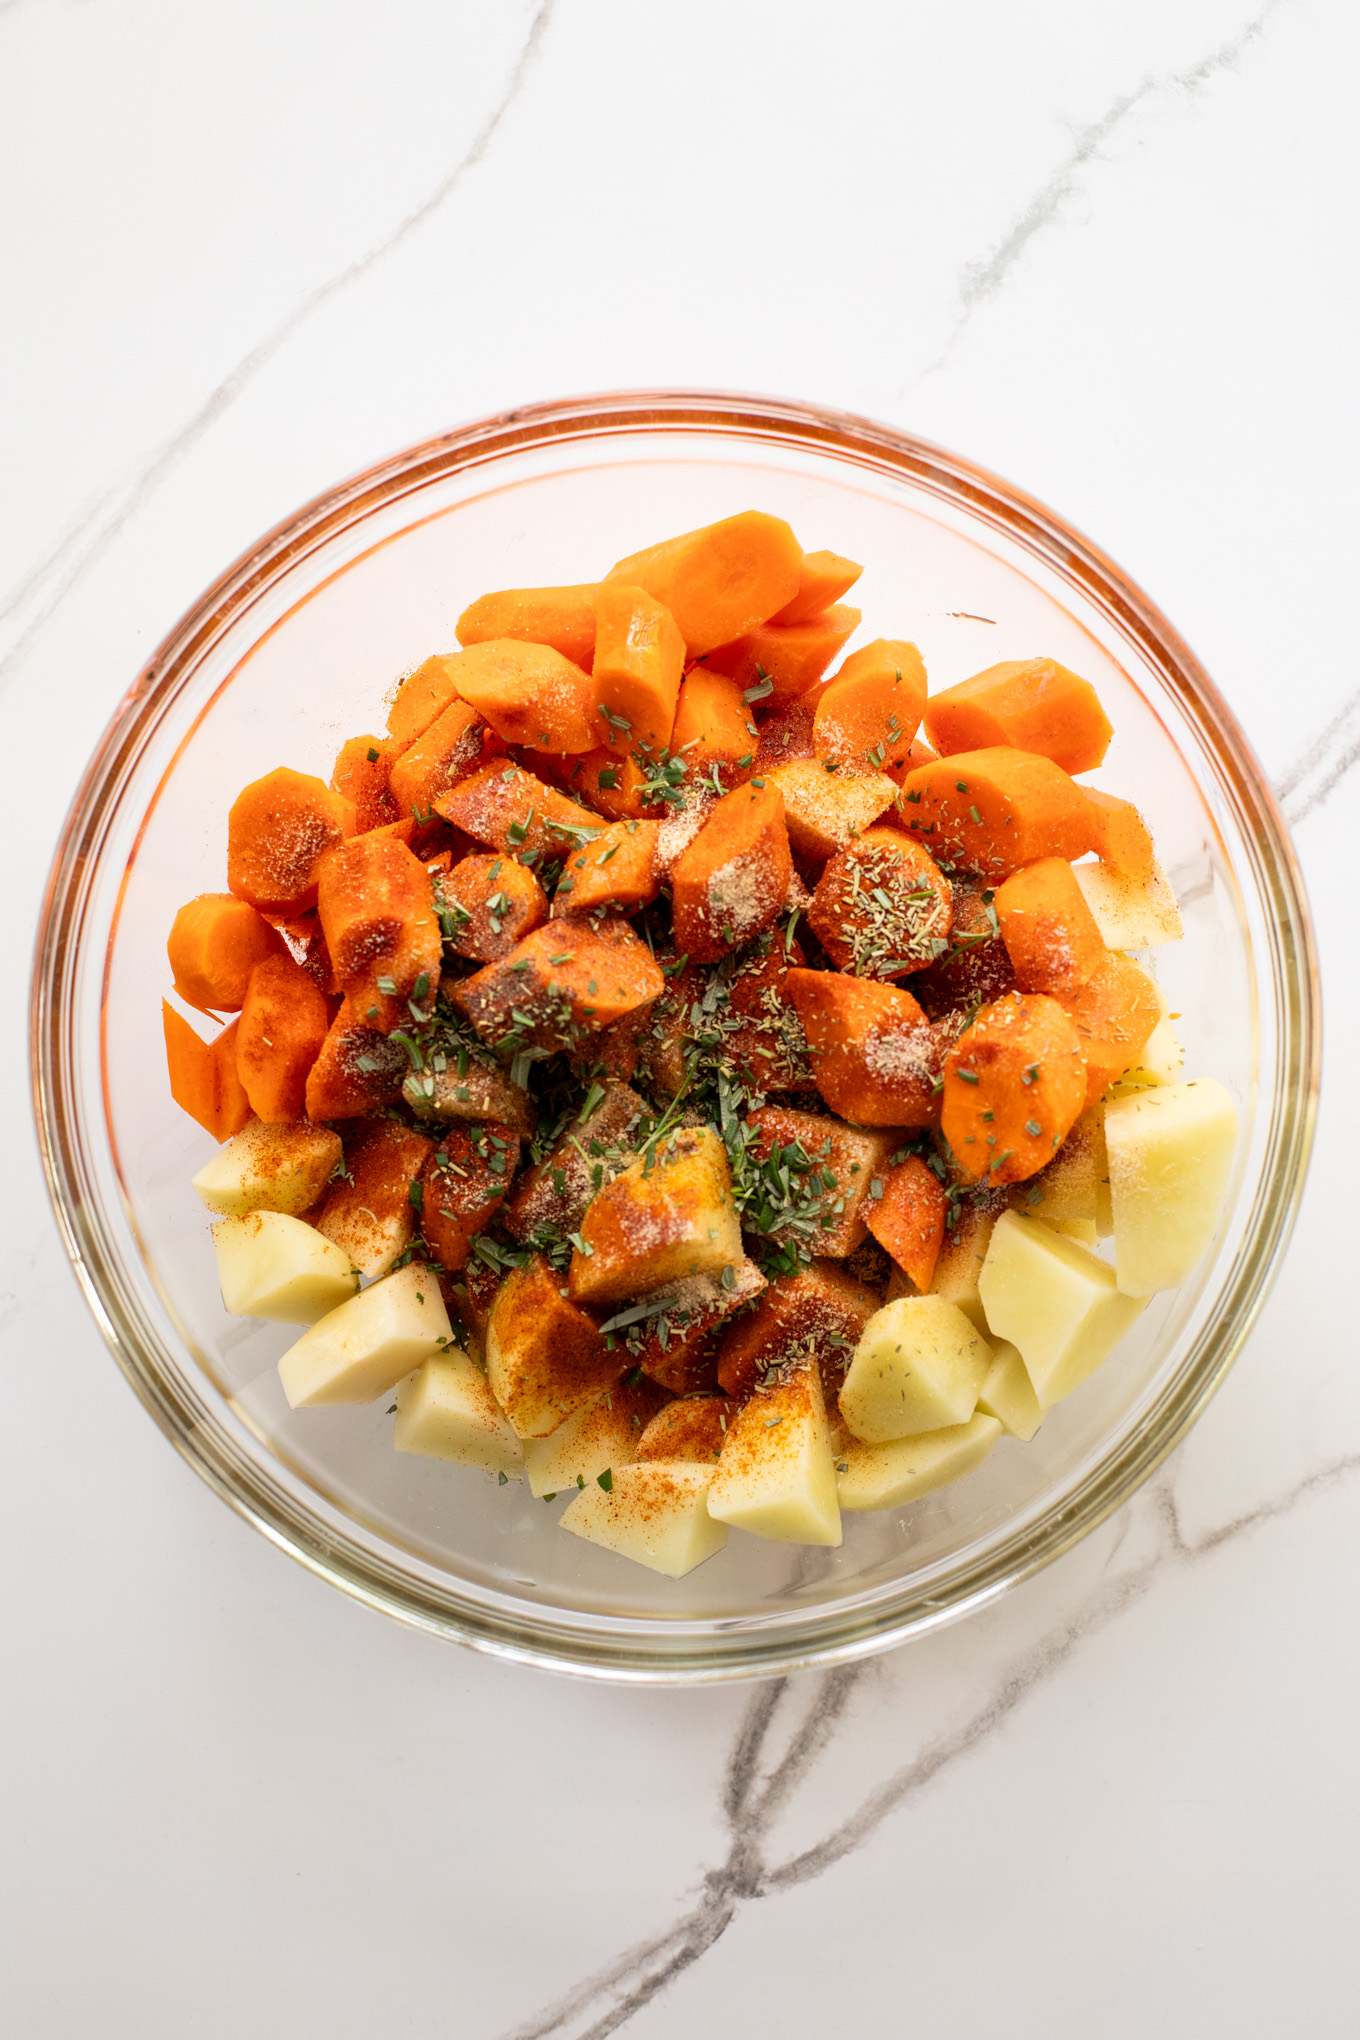 cut up carrots and potatoes in a glass bowl with oil and spices.